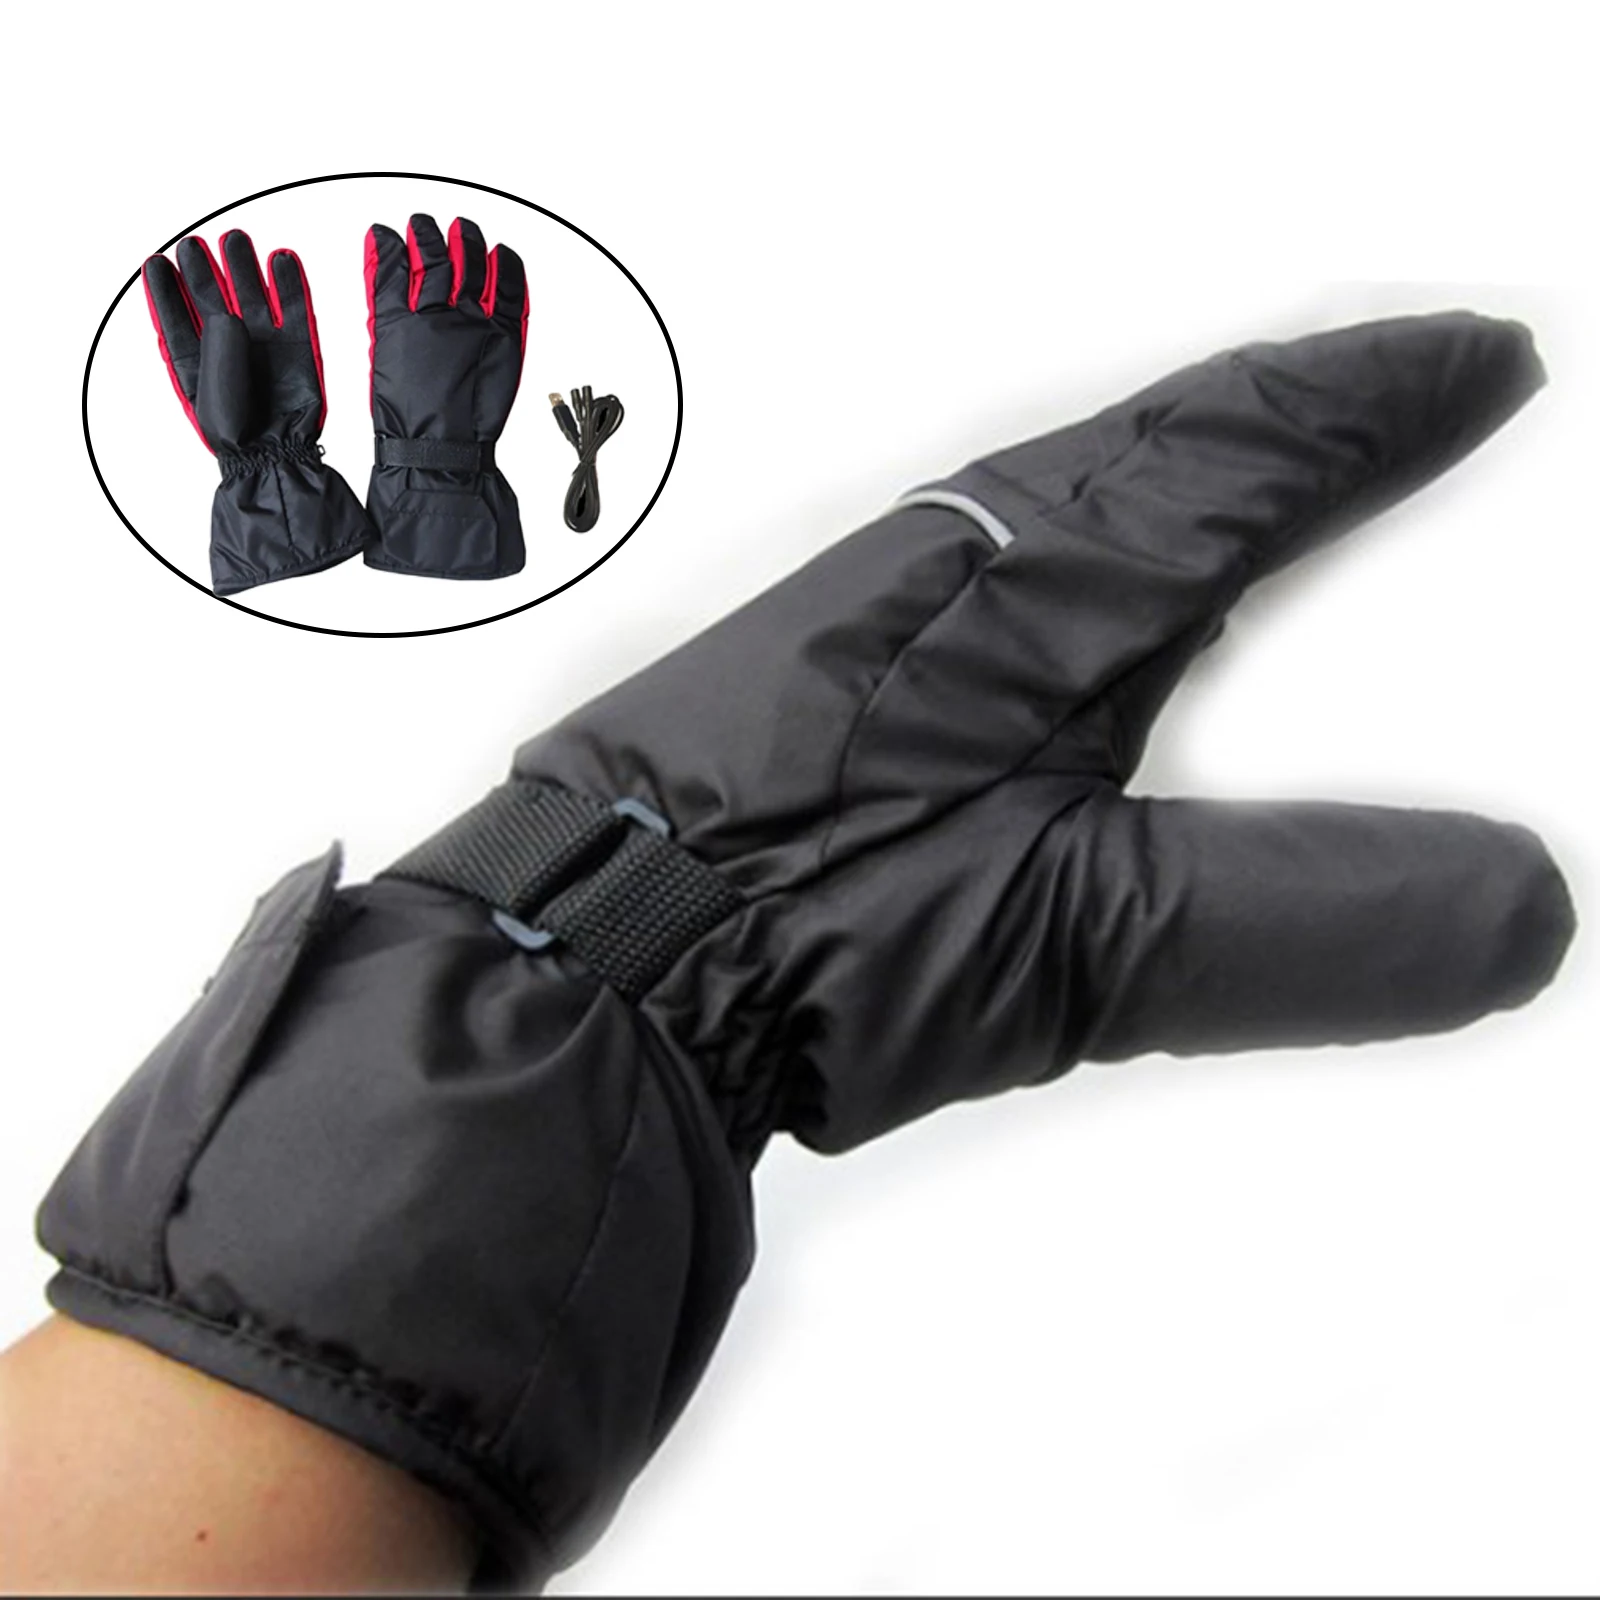 1 Pair Heated Gloves Electric Heating Gloves Windproof Winter Gloves for Outdoor Hiking Riding Racing Bike Motorcycle Gloves